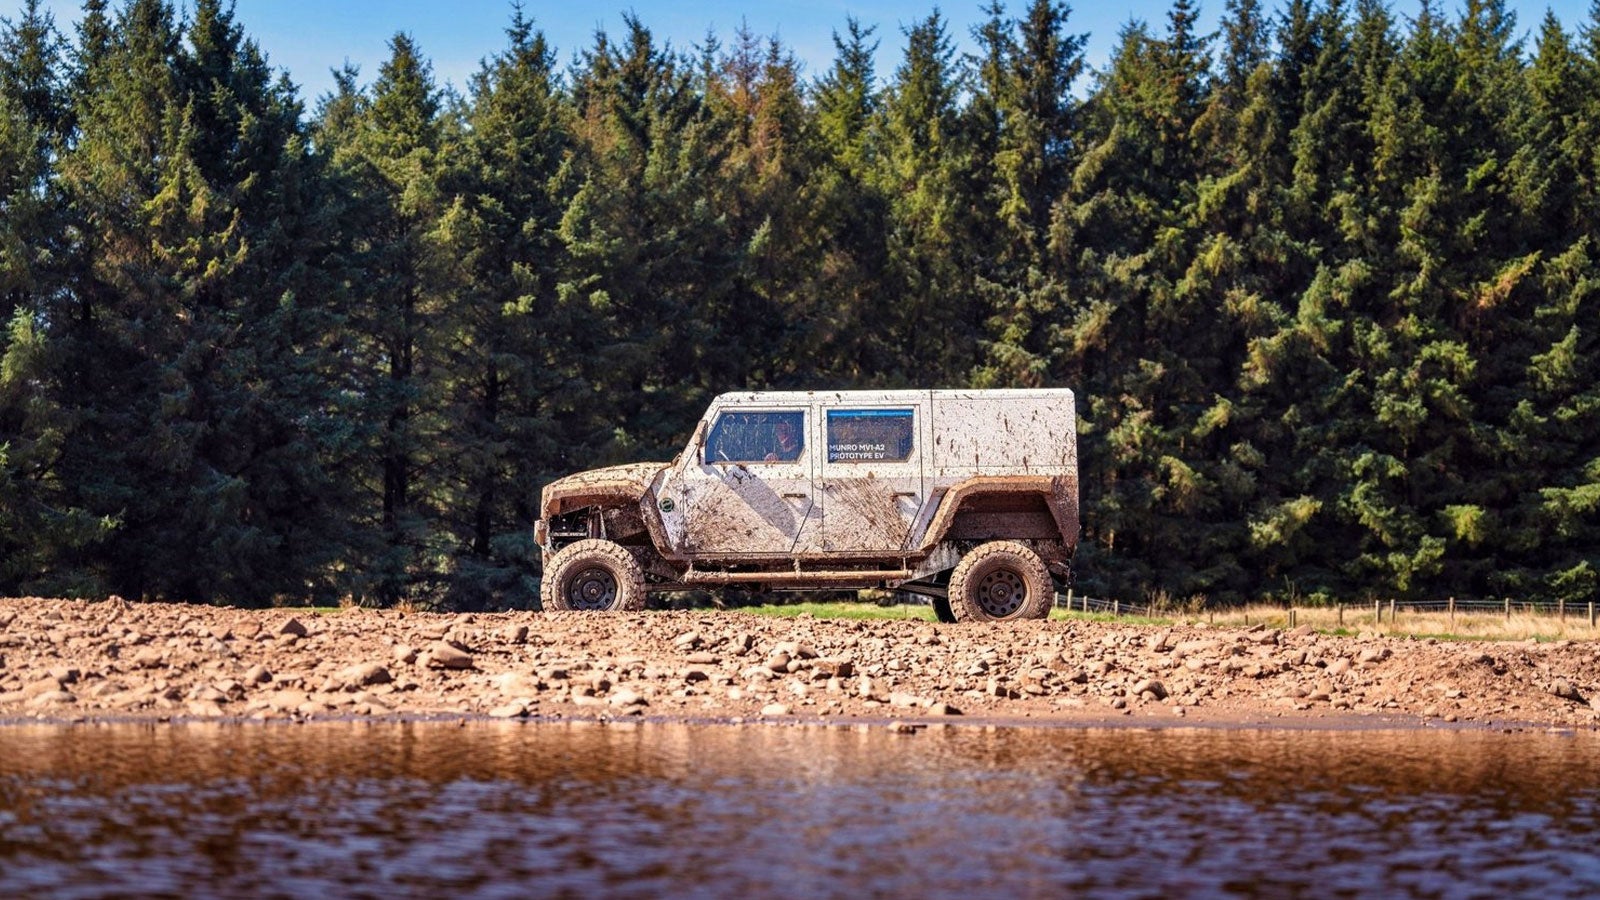 Munro’s New Defender-Inspired EV is Coming Next Month